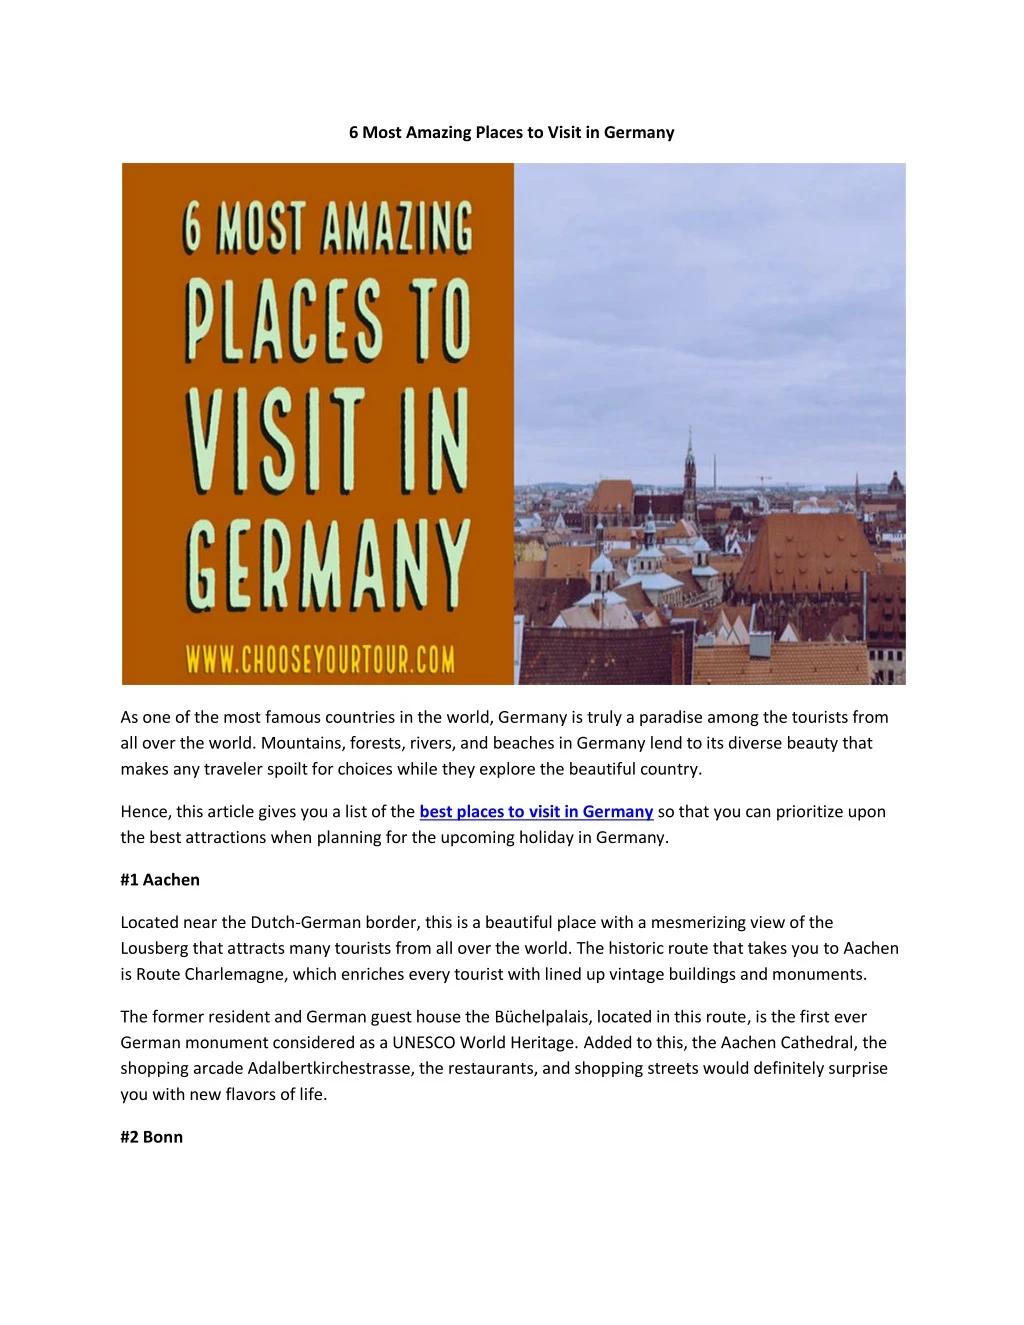 6 most amazing places to visit in germany